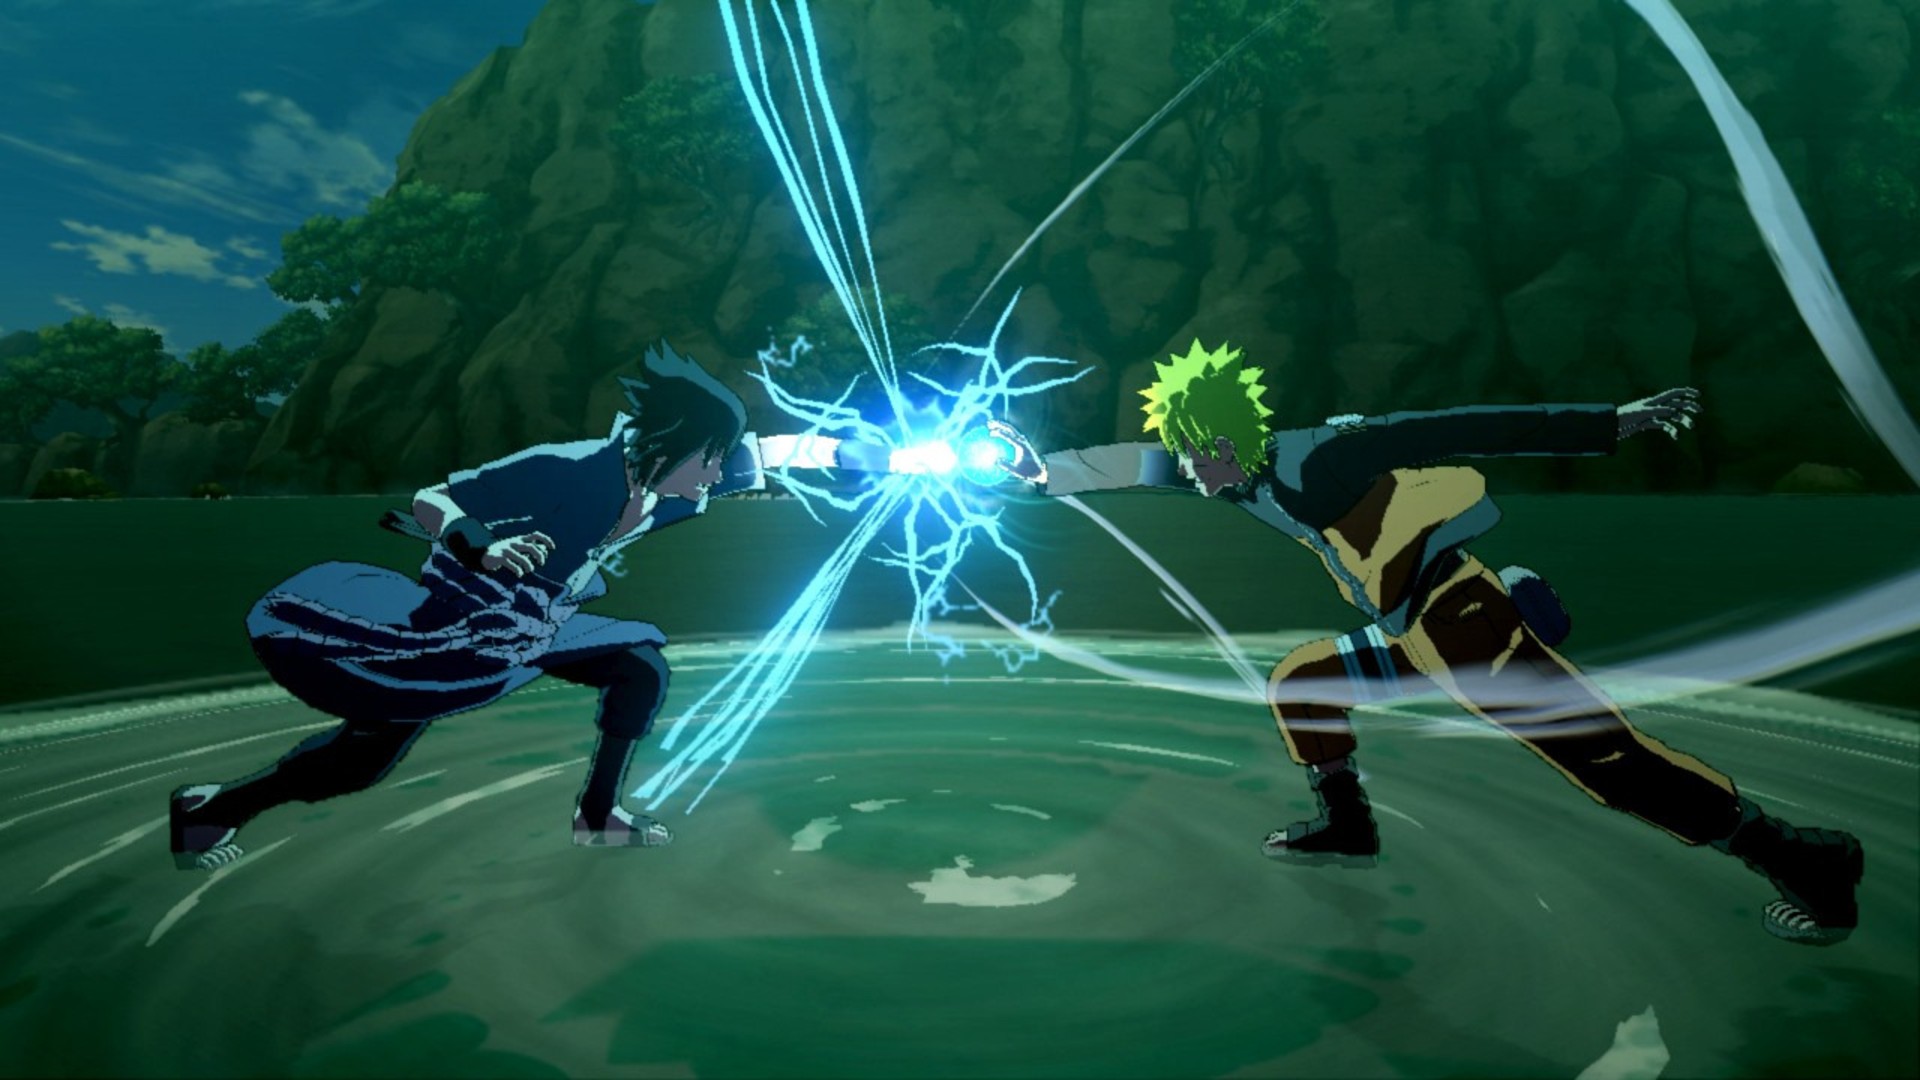  Ultimate Ninja Storm 3 Full Burst. Image shows two fighter whose fists have collided and generated electricity.